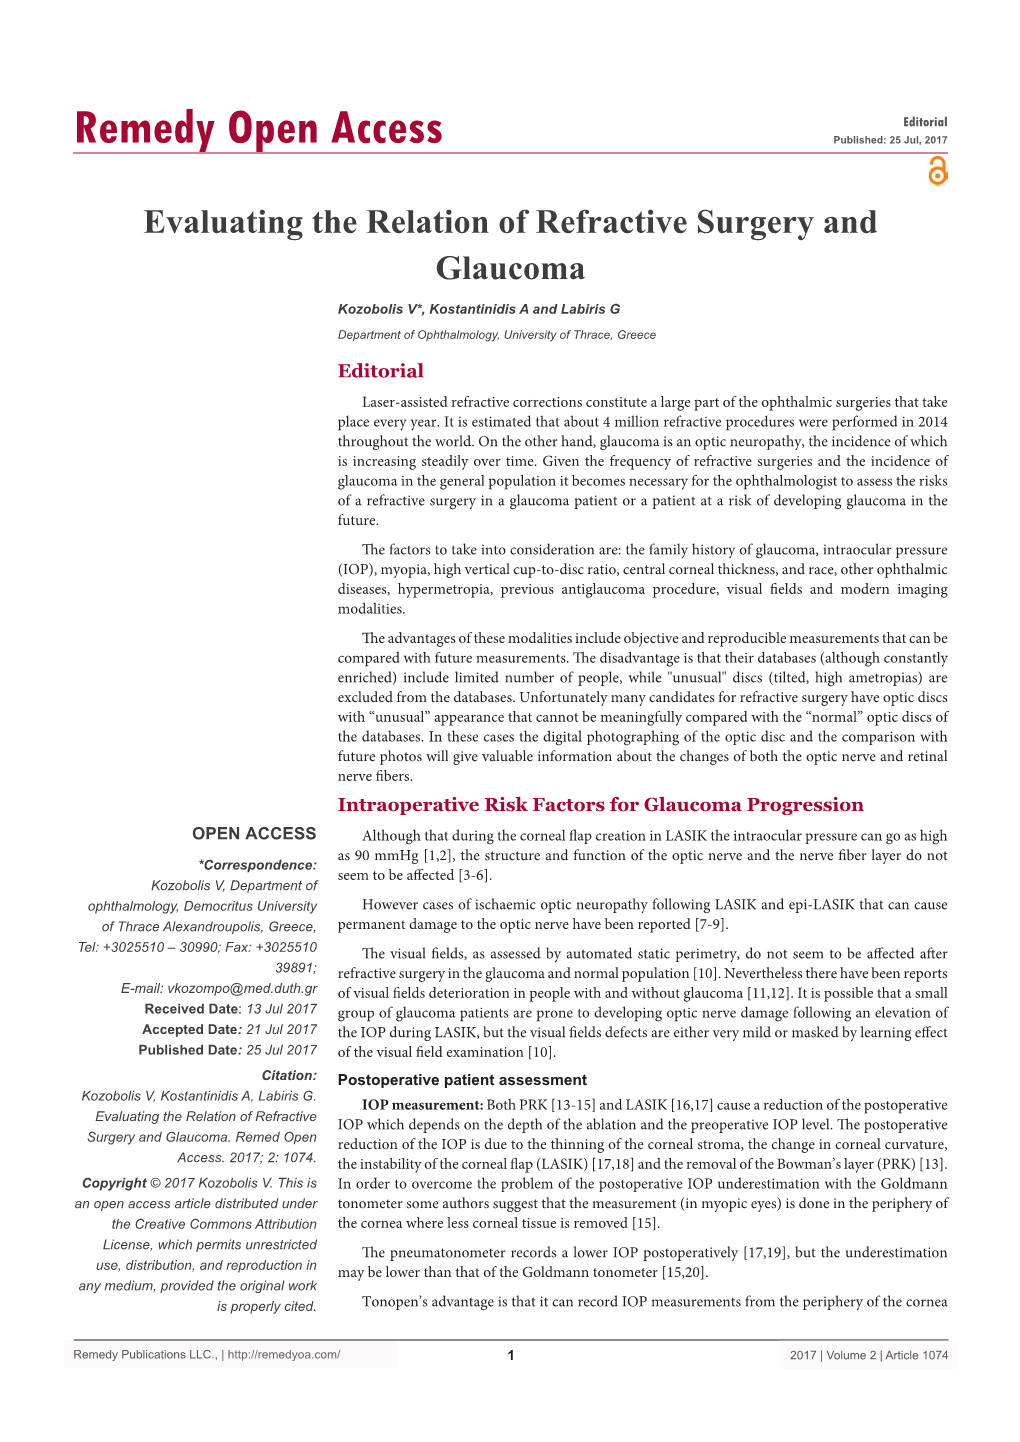 Evaluating the Relation of Refractive Surgery and Glaucoma